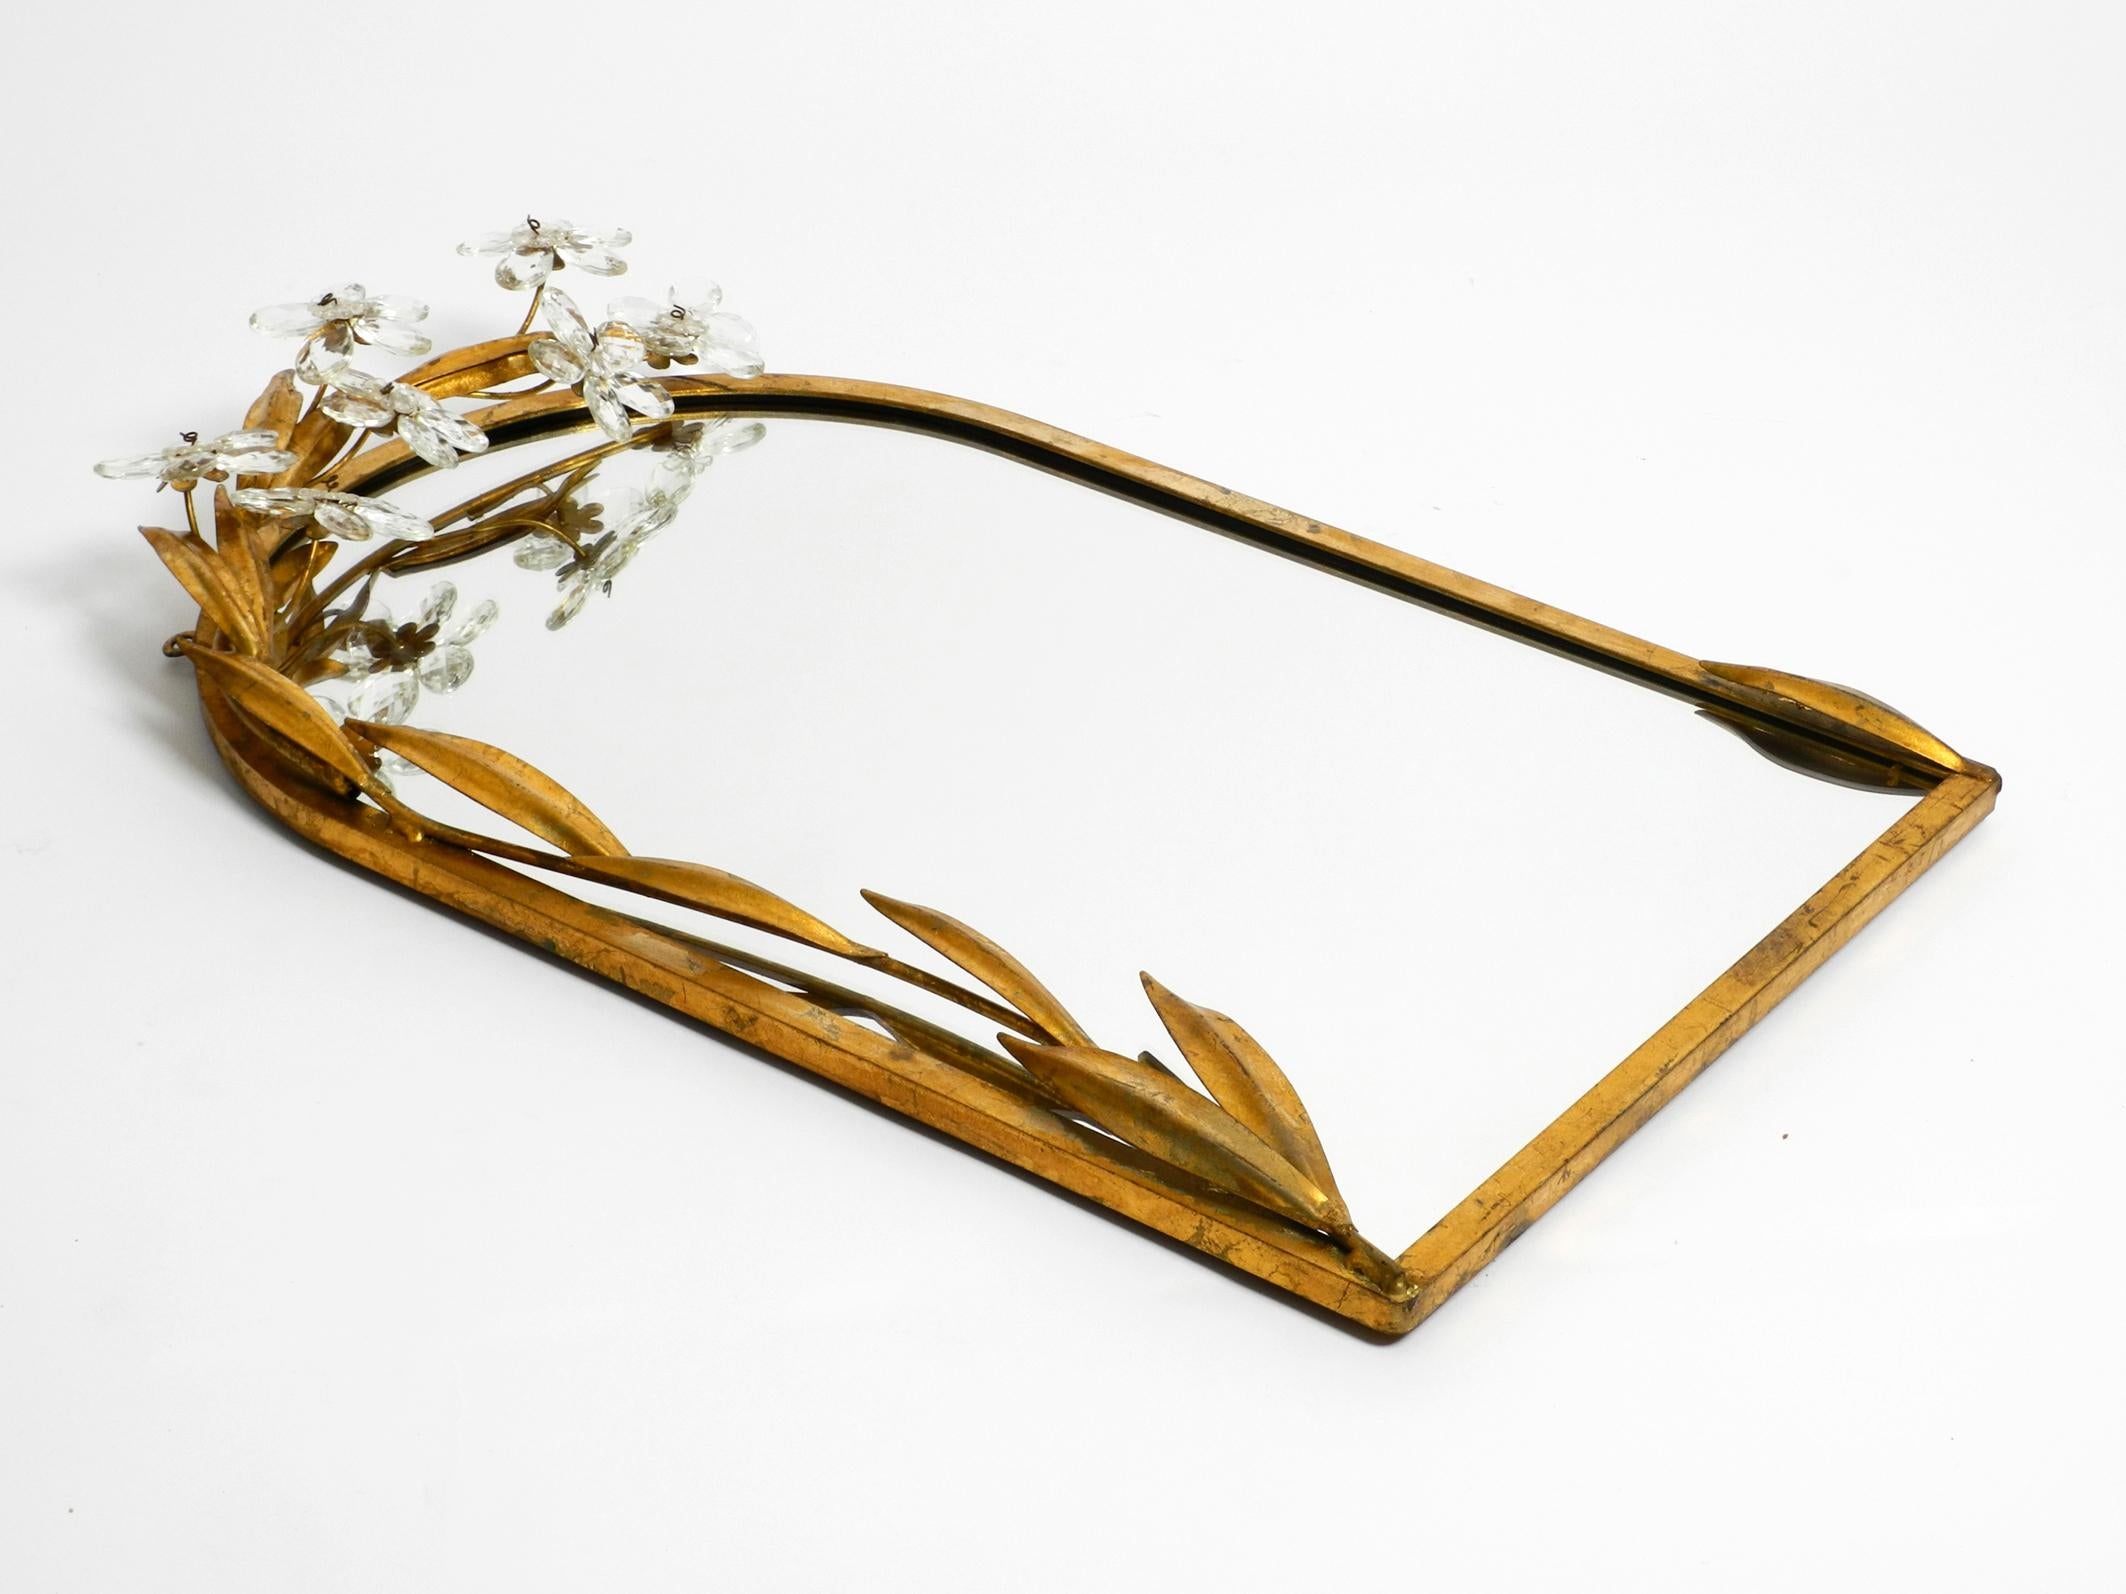 Mid-20th Century Set of a Floral Iron Wall Mirror and Matching Shelf Gold Plated by Banci Firenze For Sale